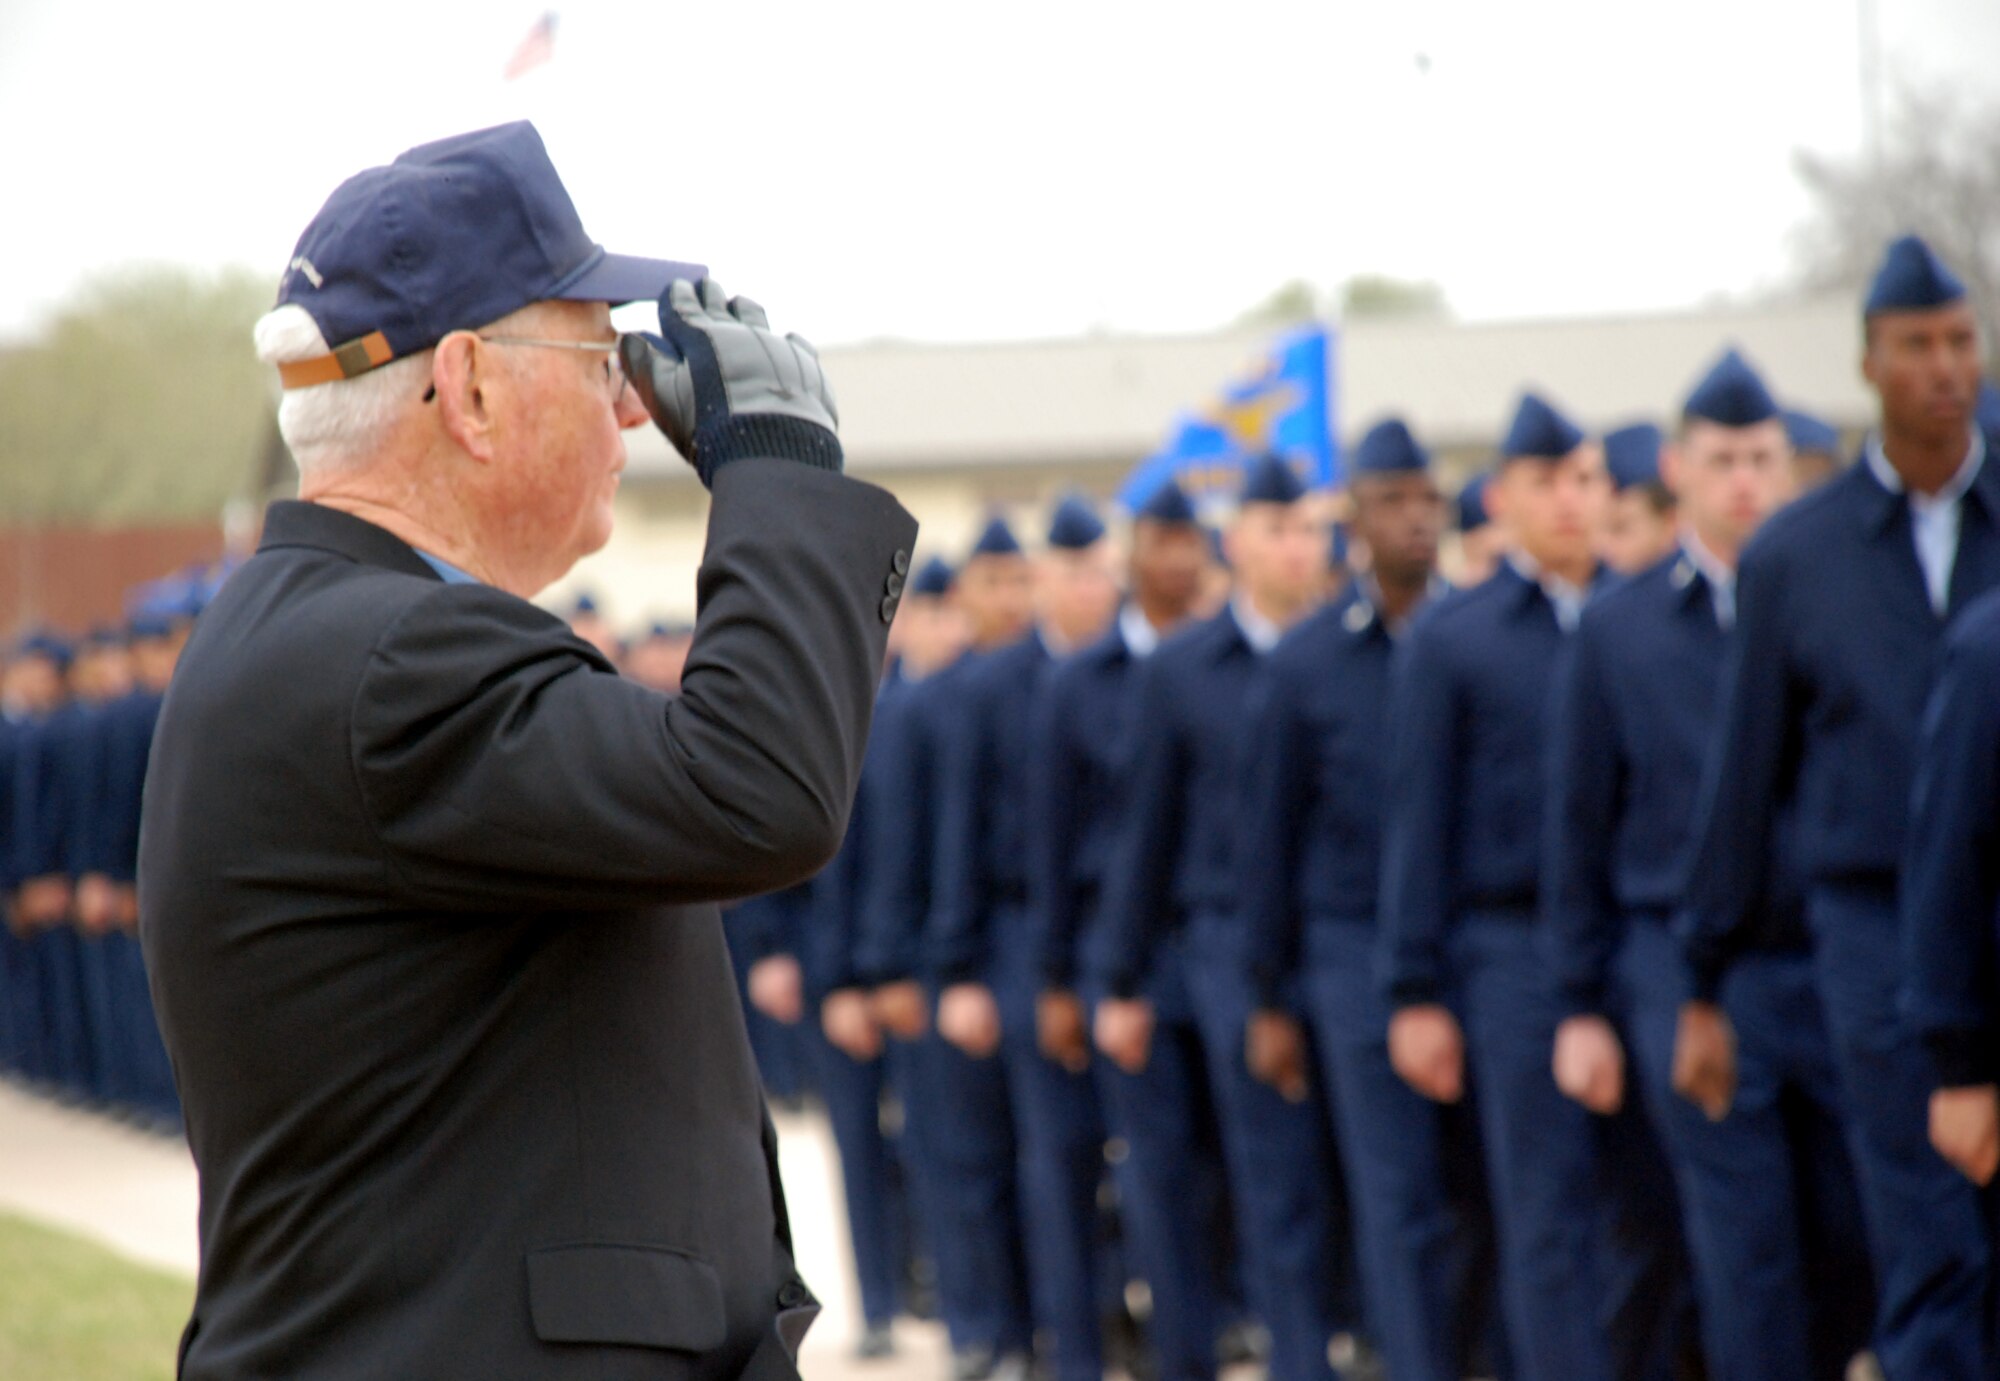 Chief Master Sgt. of the Air Force (ret.) Robert Gaylor, salutes passing Airmen during a parade March 28 while visiting Sheppard Air Force Base. Chief Gaylor visited Sheppard and spoke to about 2,000 Airmen, offering career advice and answering questions. (U.S. Air Force photo/Airman 1st Class Jacob Corbin).